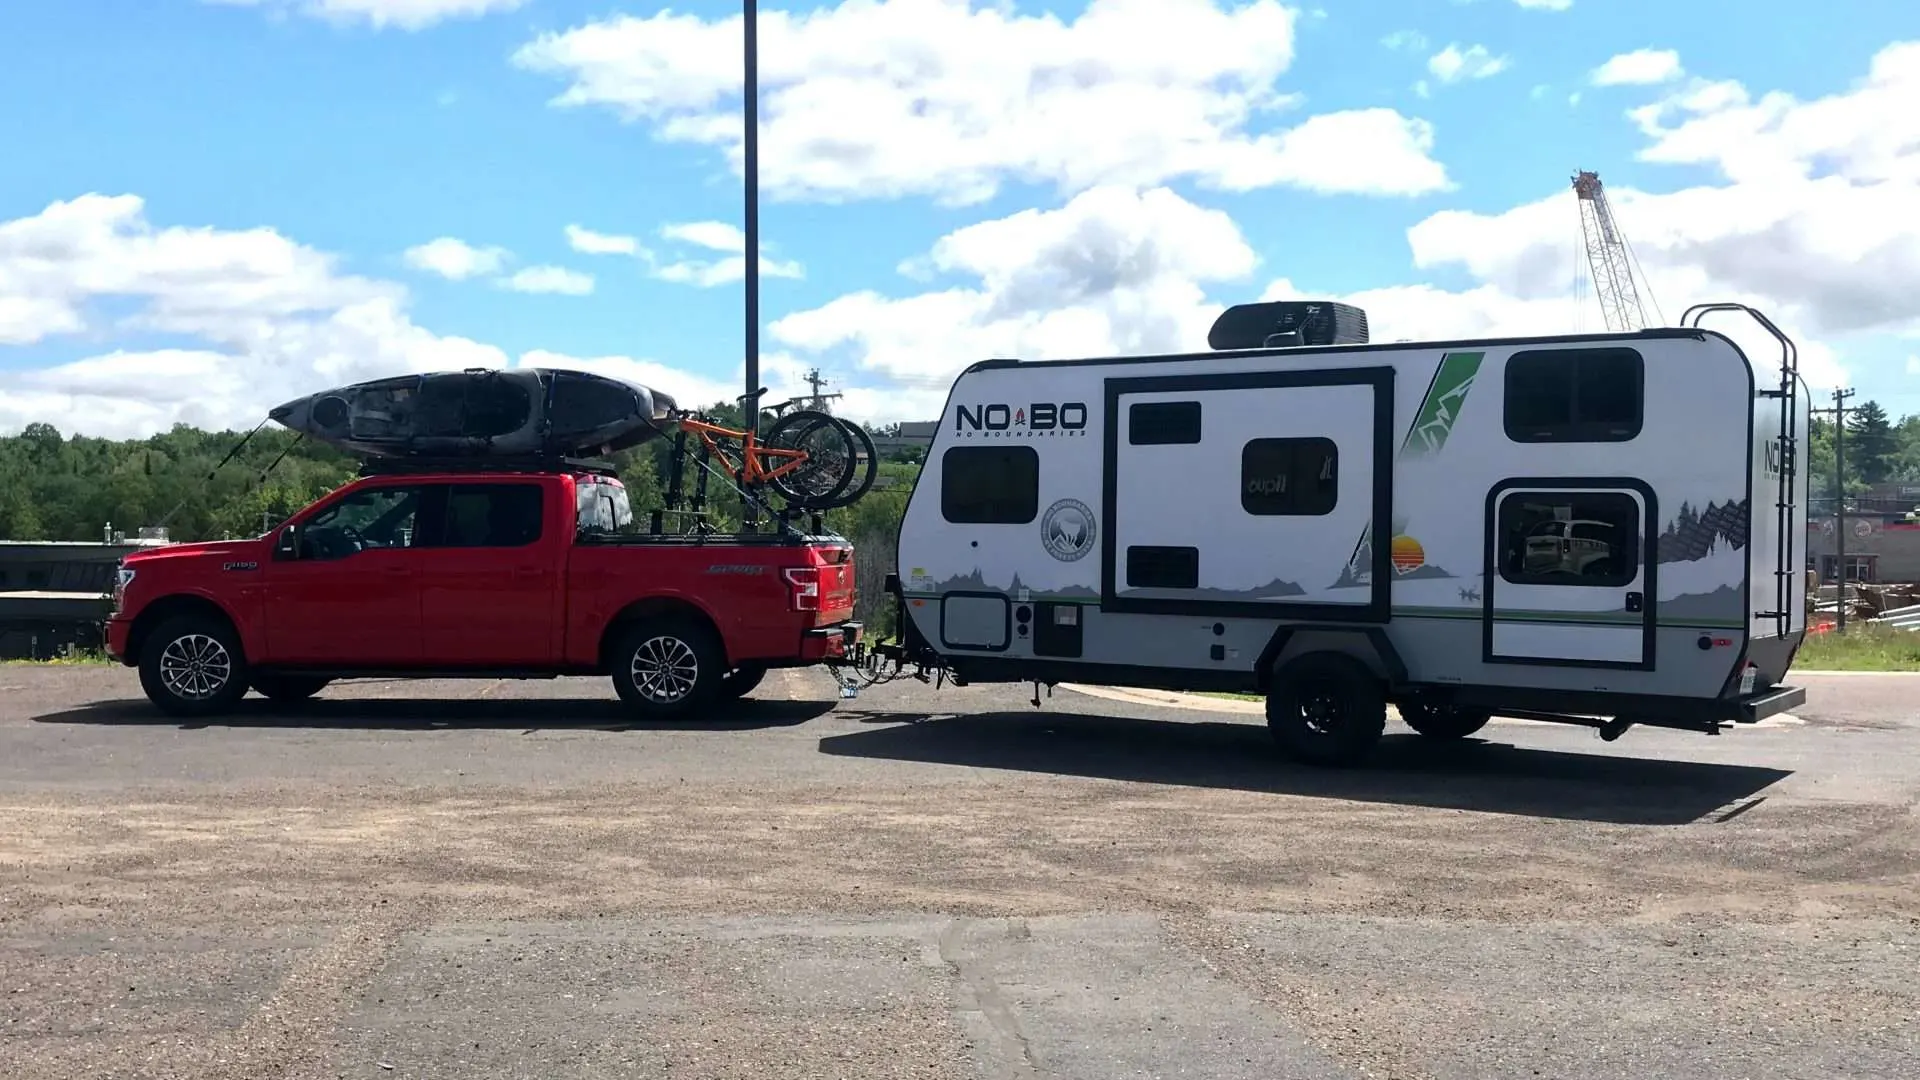 Ford F-150 towing a Nobo Trailer